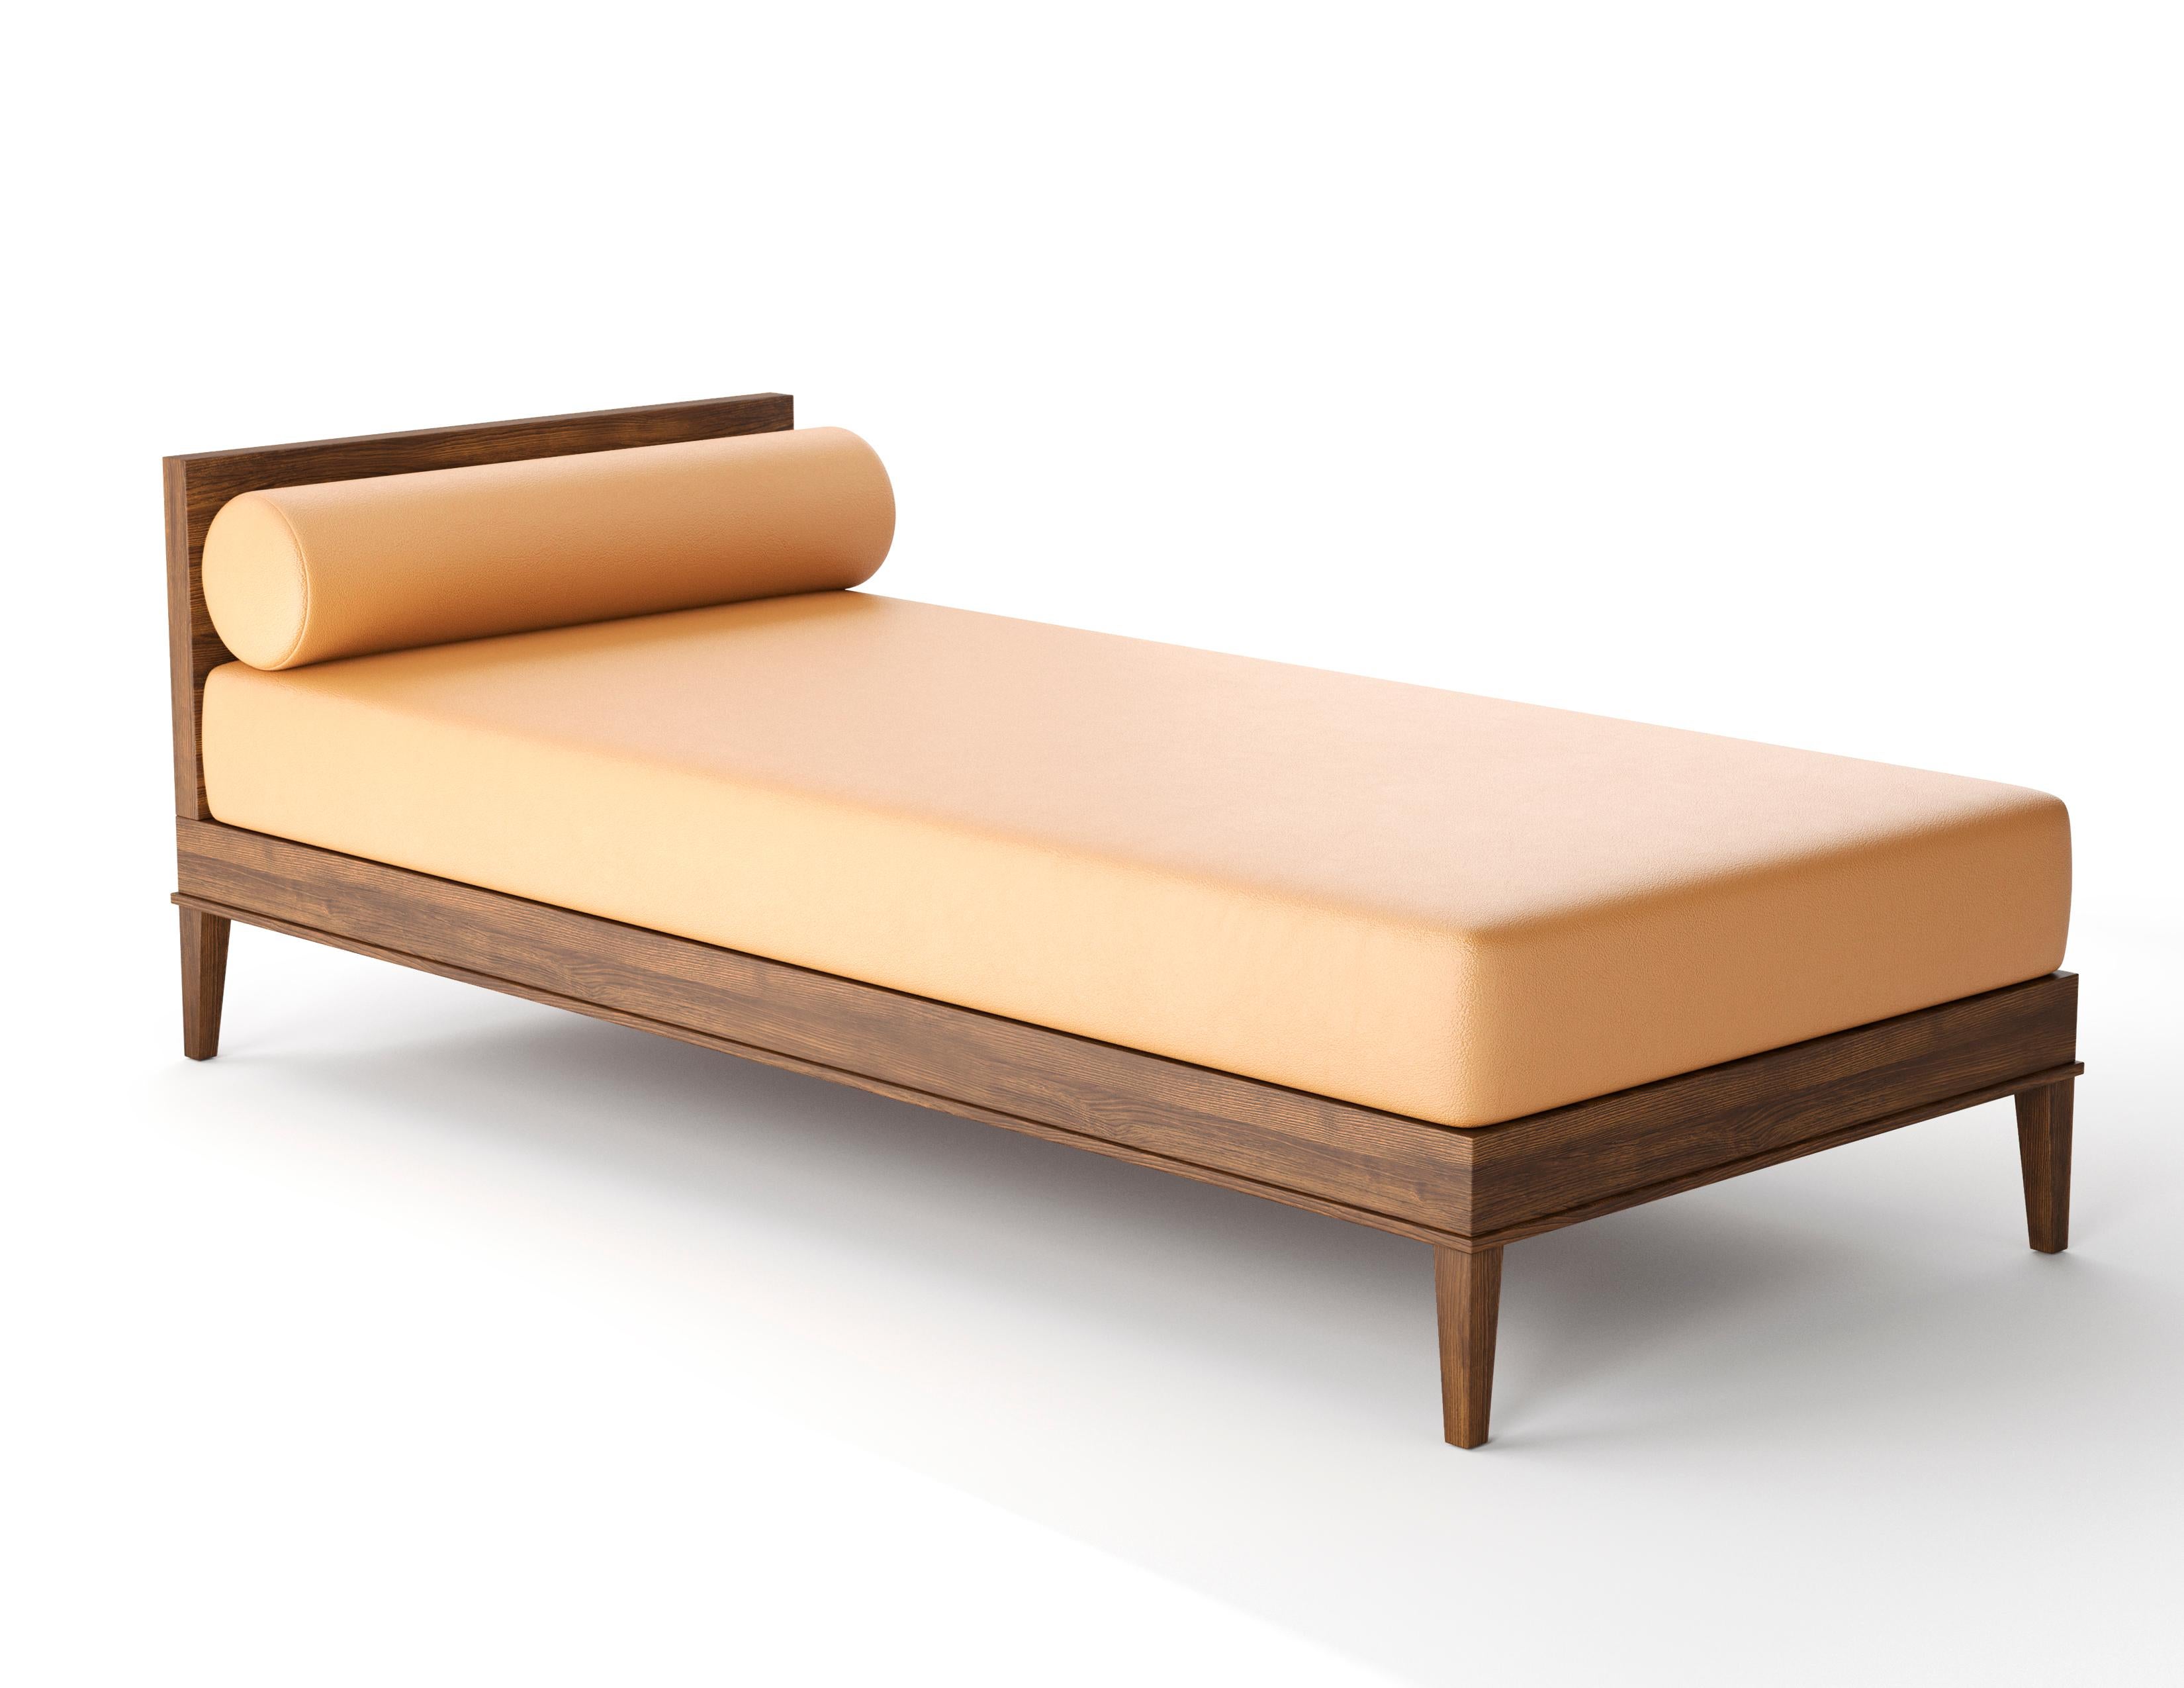 The Randolph daybed is a stylish and modern piece that can be used in any room. Hand made in our shop in Brooklyn it has a foam mattress wrapped in down & feather with a loose decorative bolster all crafted by hand. Wood frame and legs made in your